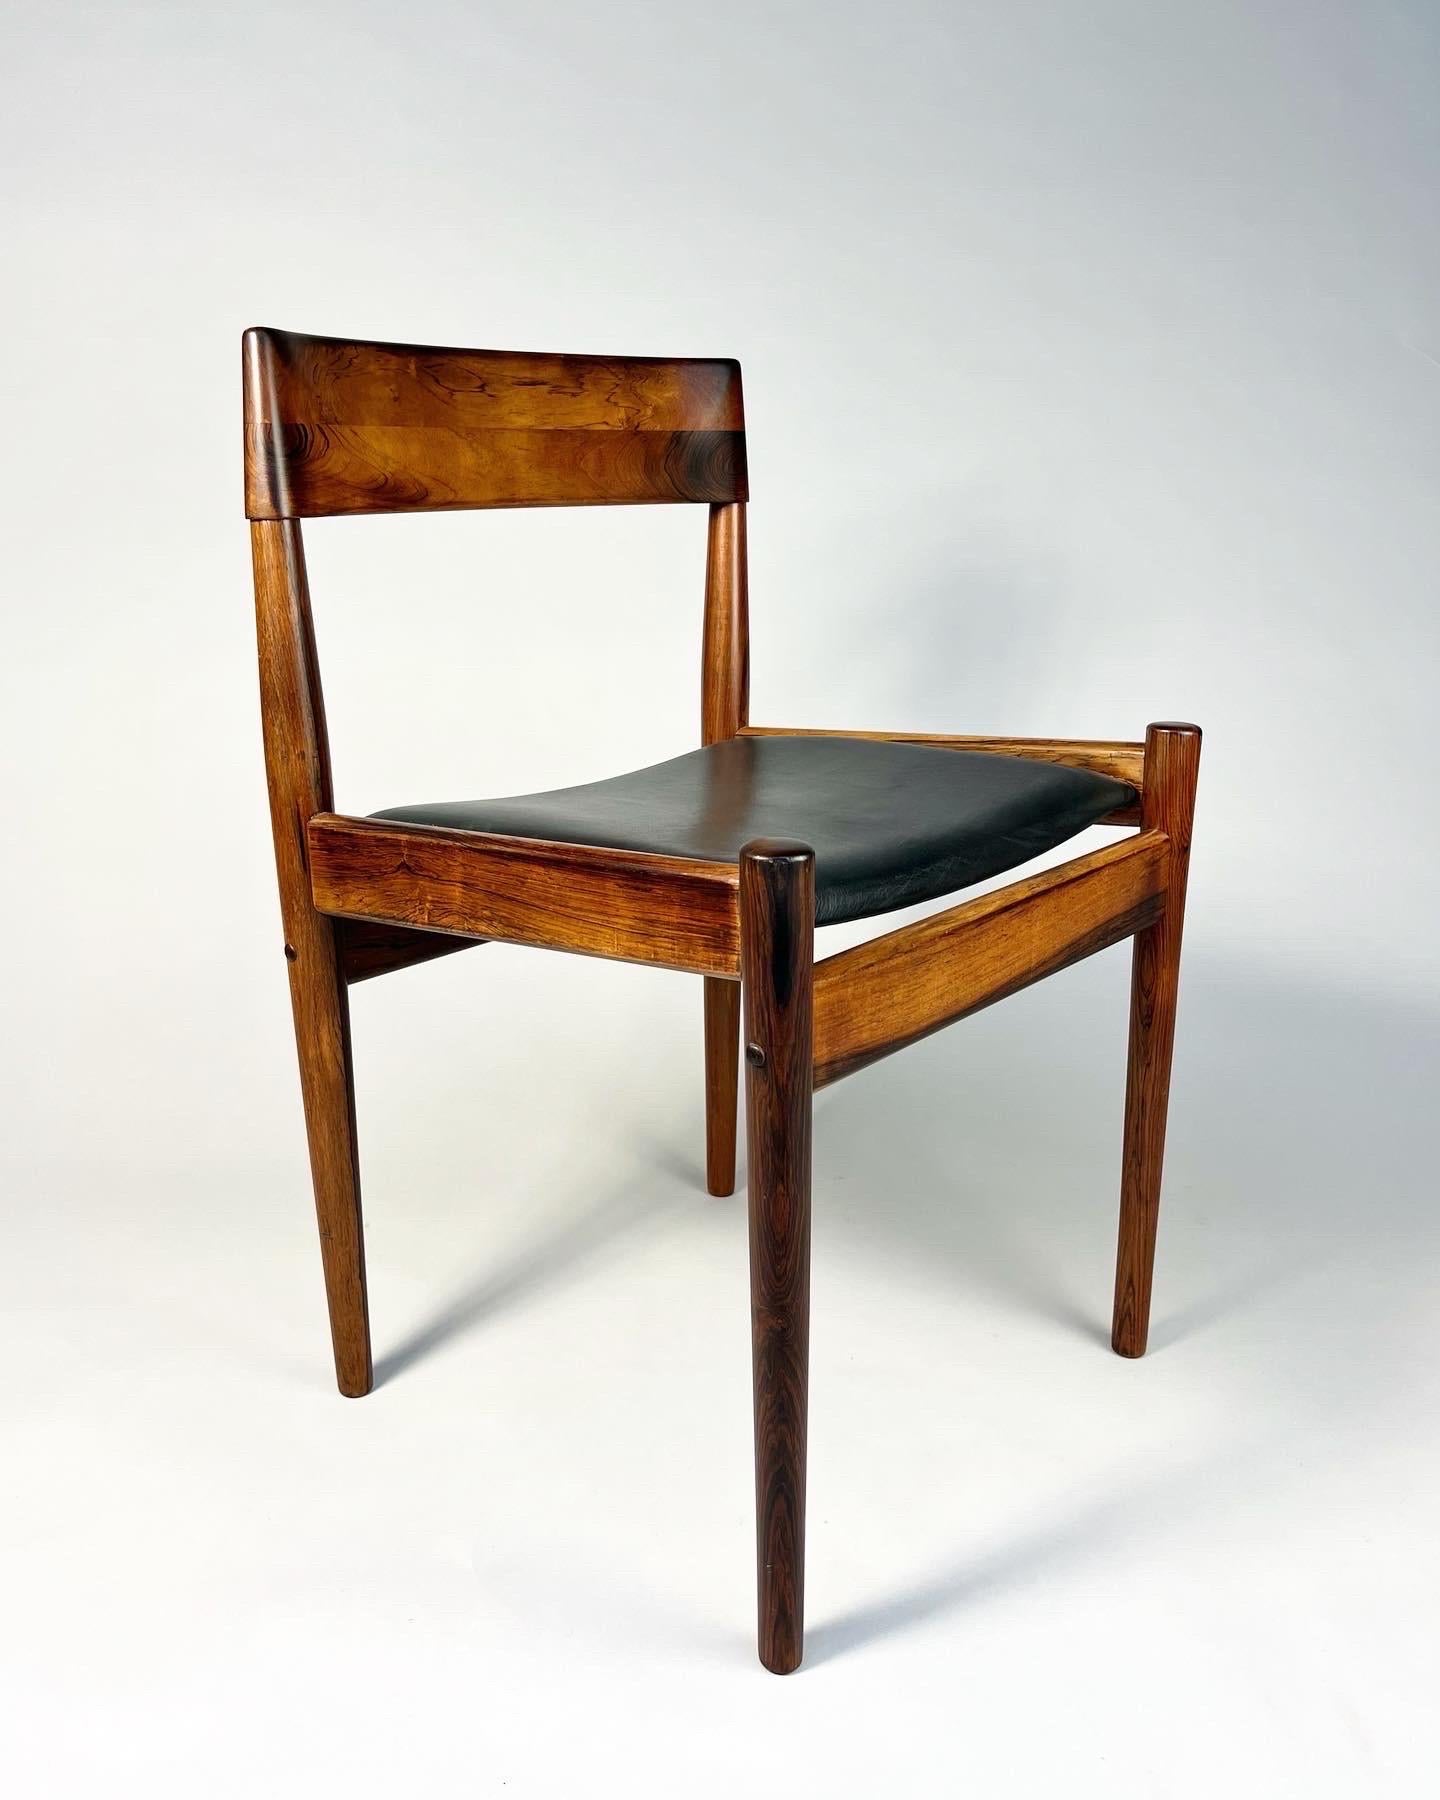 Set of four dining chairs, designed by Grete Jalk for P. Jeppesen, model No. PJ4-2, made in Denmark in the early 1960s.

Solid rosewood frame with a beautiful grain, refinished with laquer. Upholstered in black leather.



